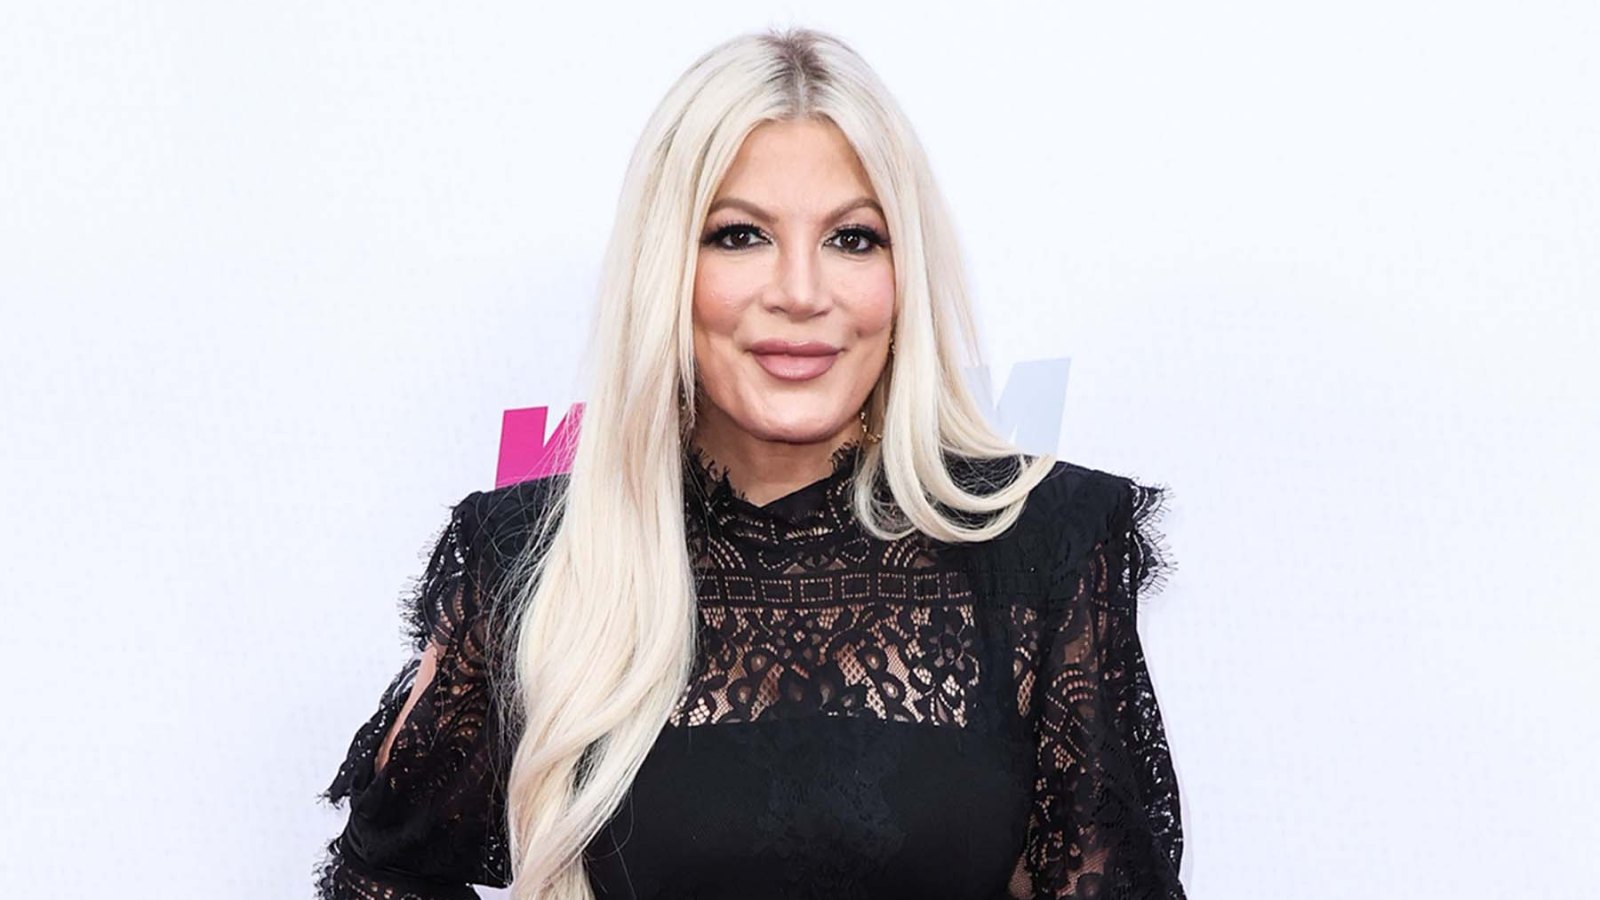 Tori Spelling Reflects on Family ‘Sickness’ After Hospital Stay